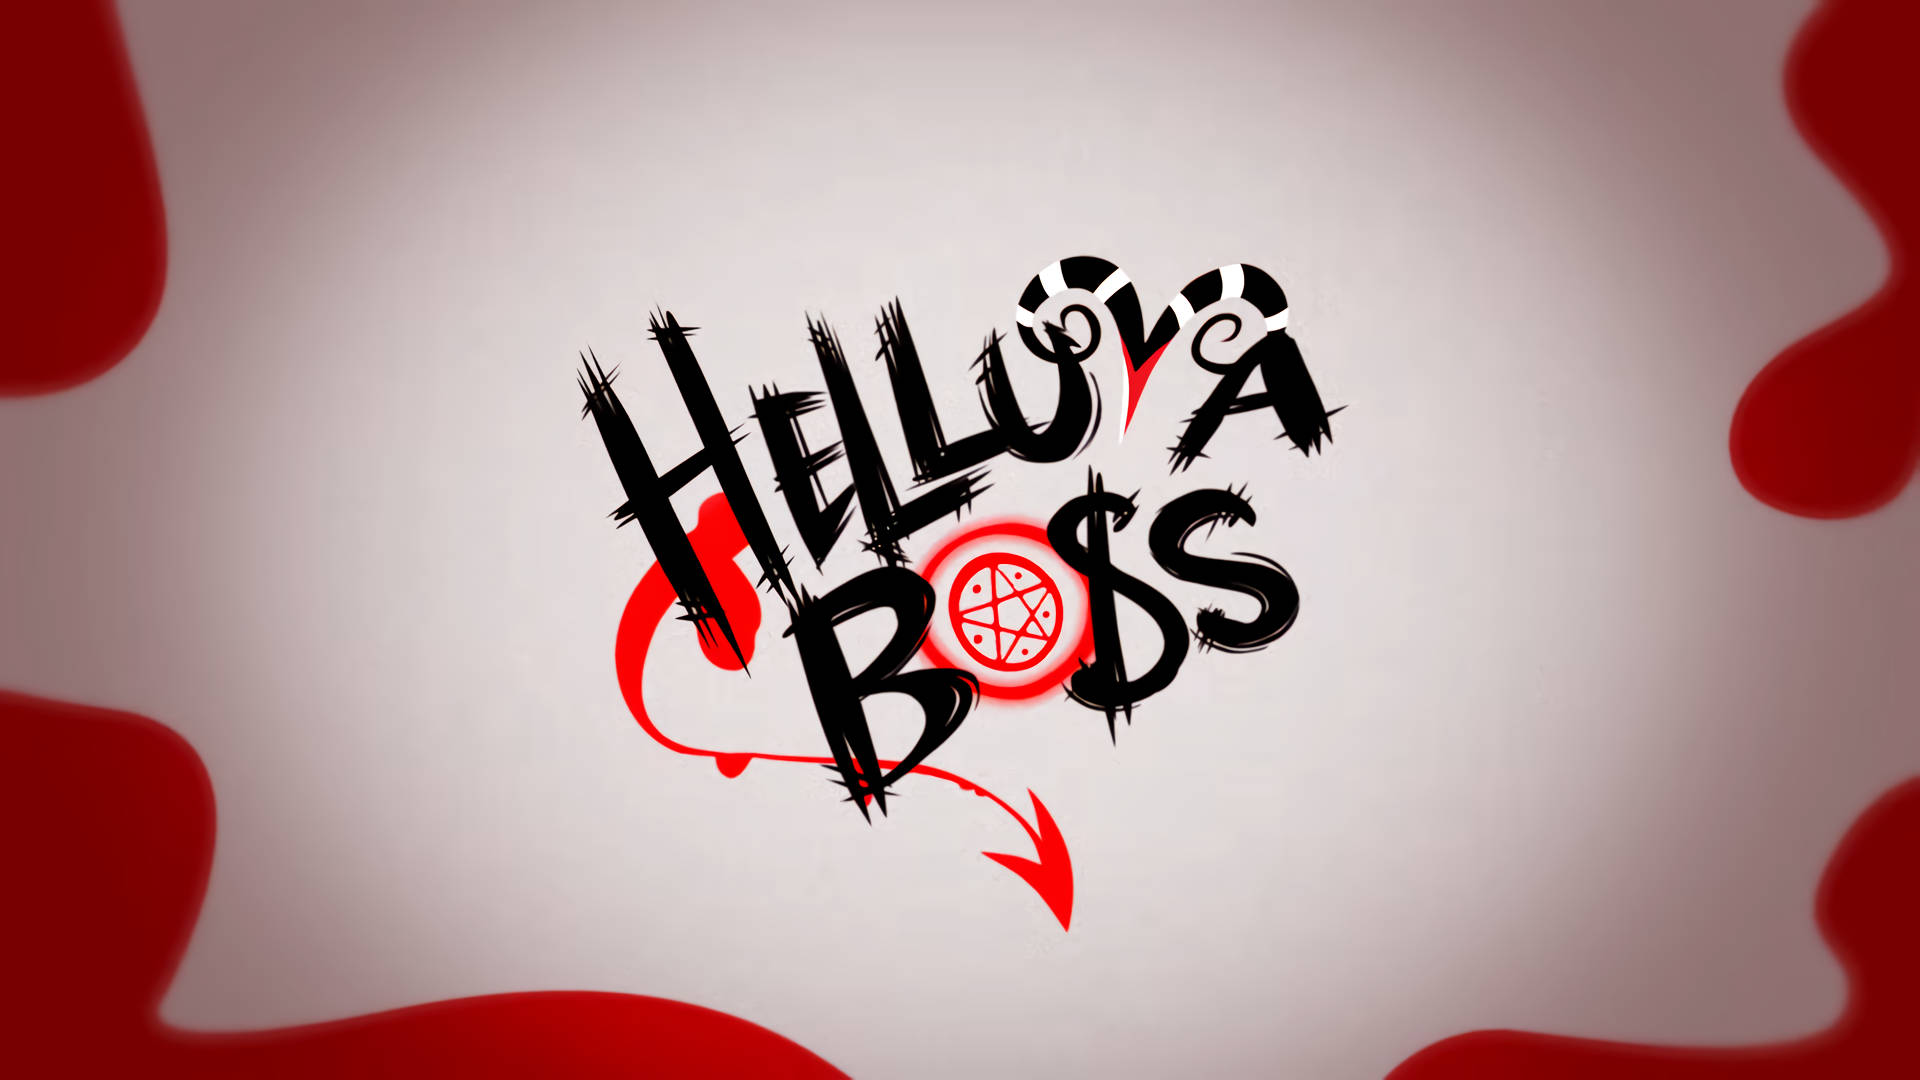 Helluva Boss 1920X1080 Wallpaper and Background Image